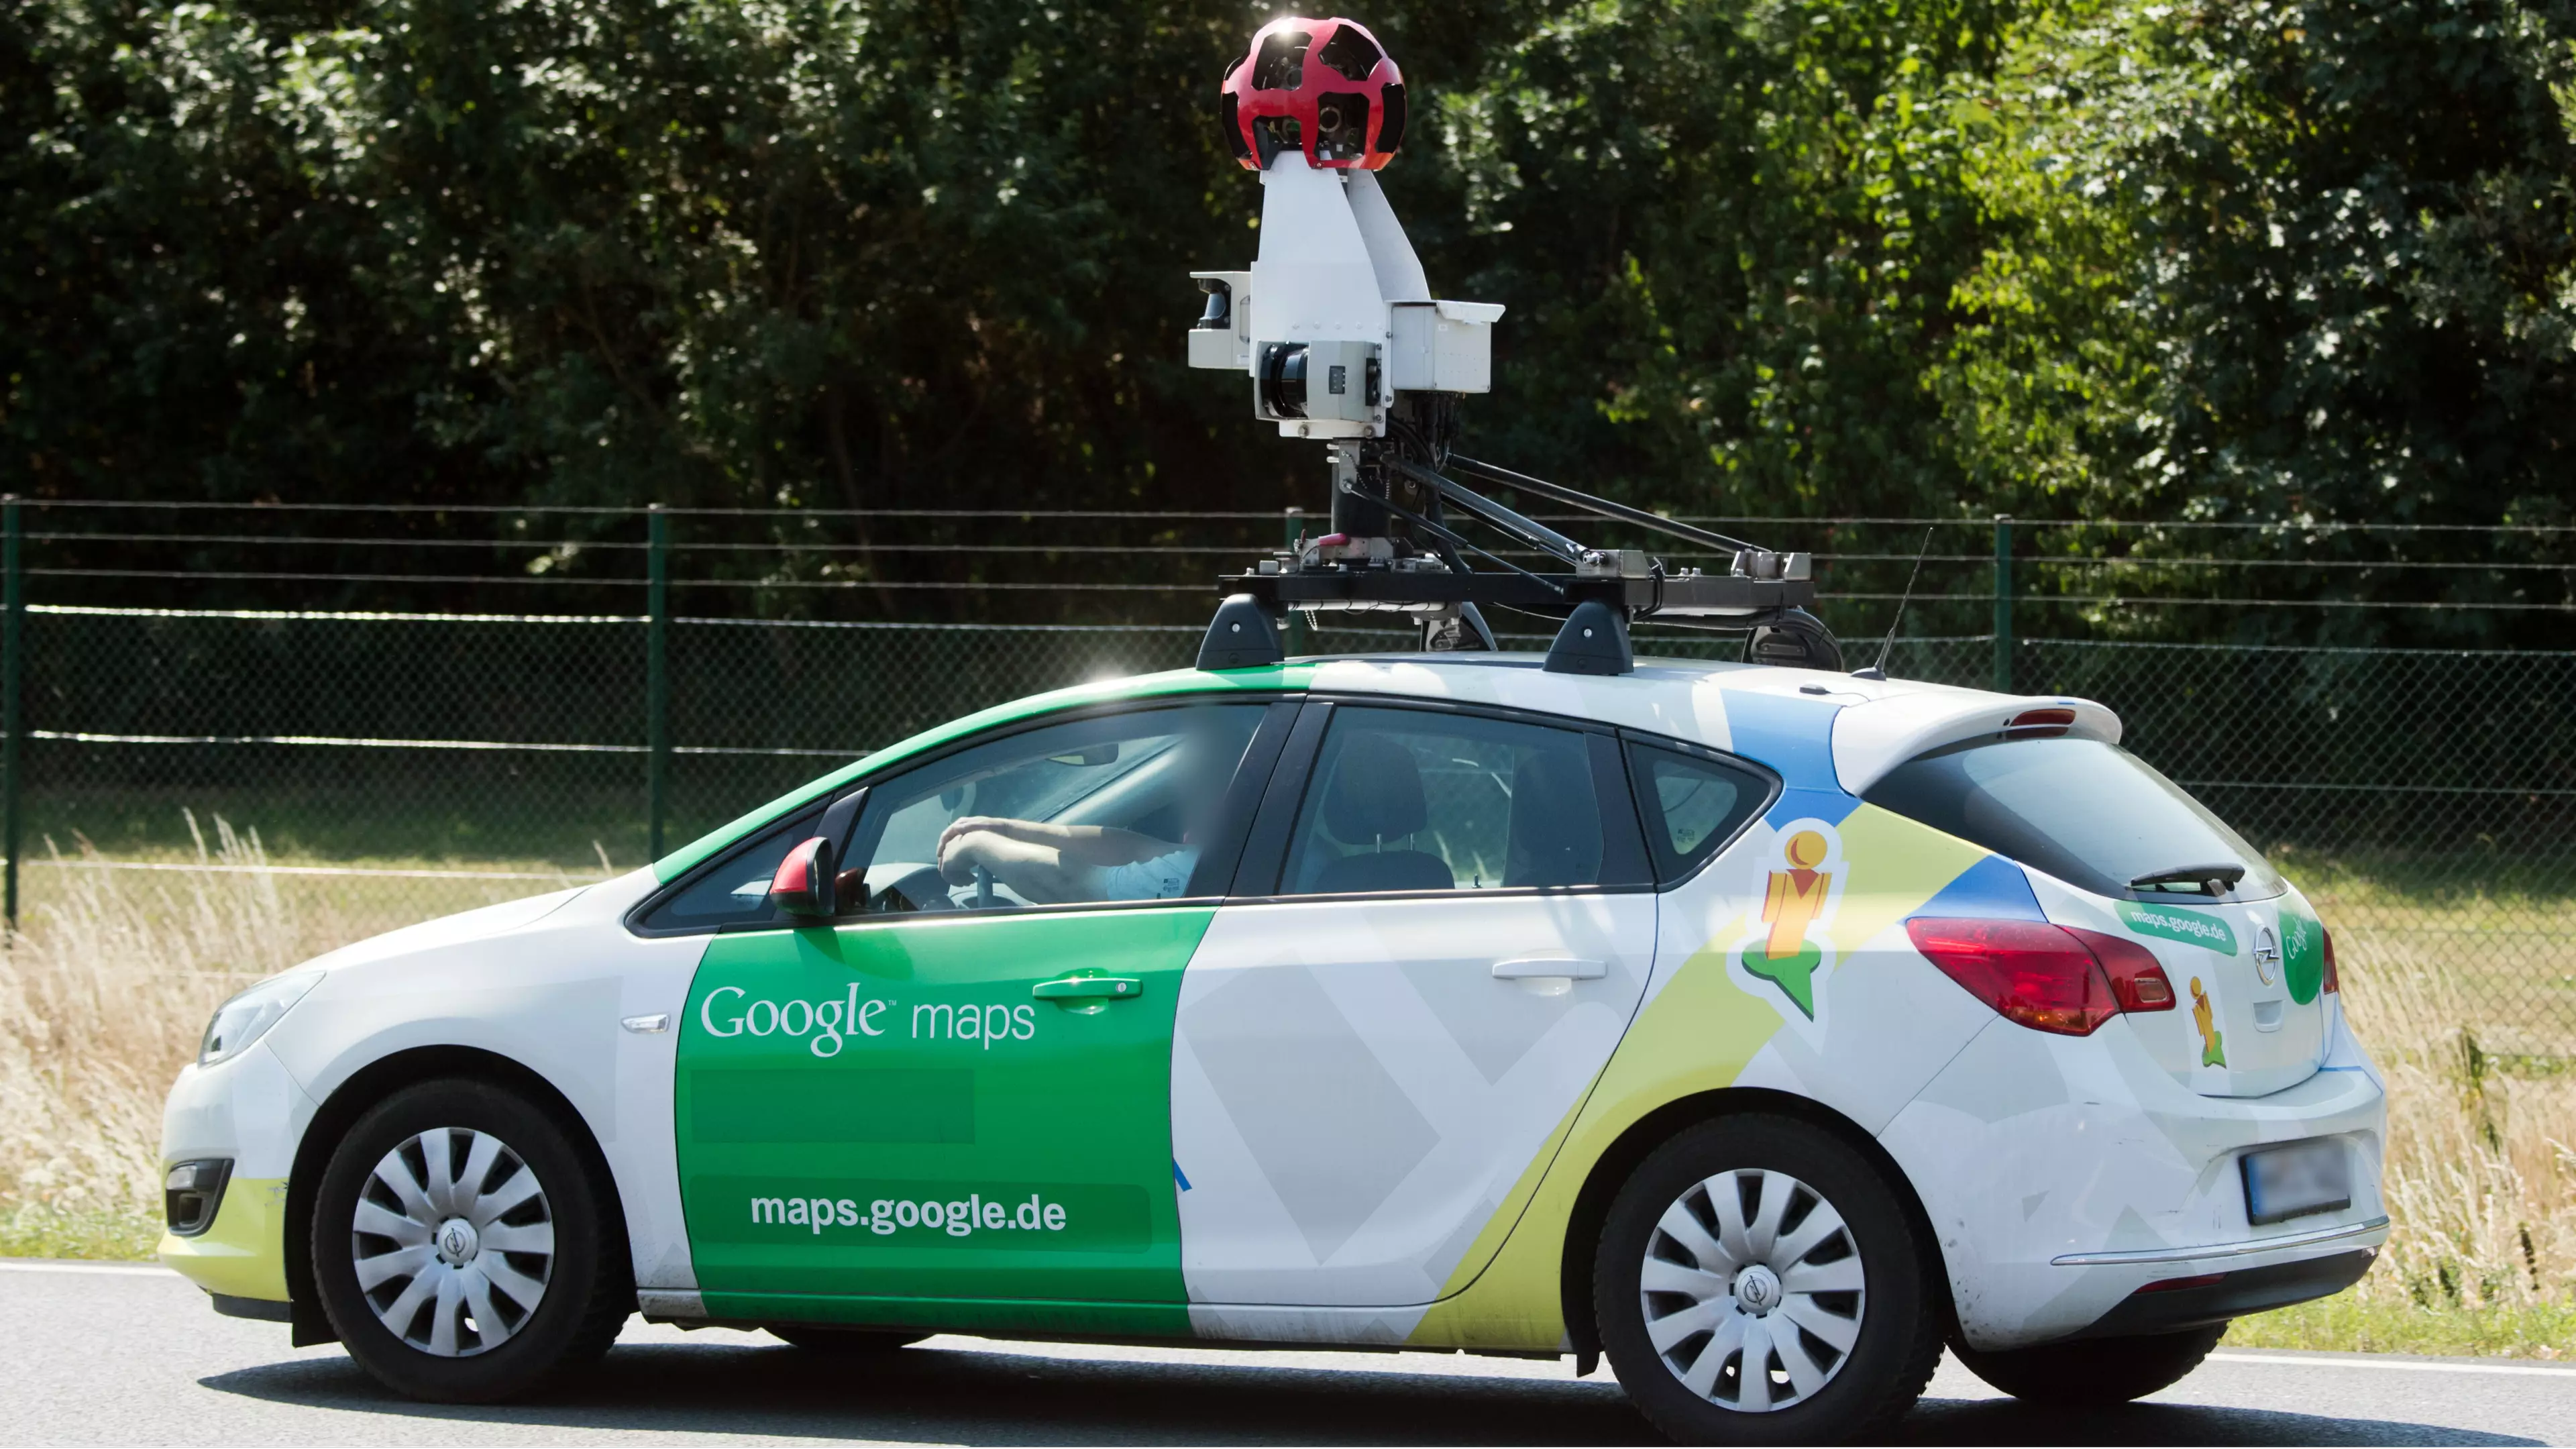 Google Street View Car Appears To Run Over A Hare 